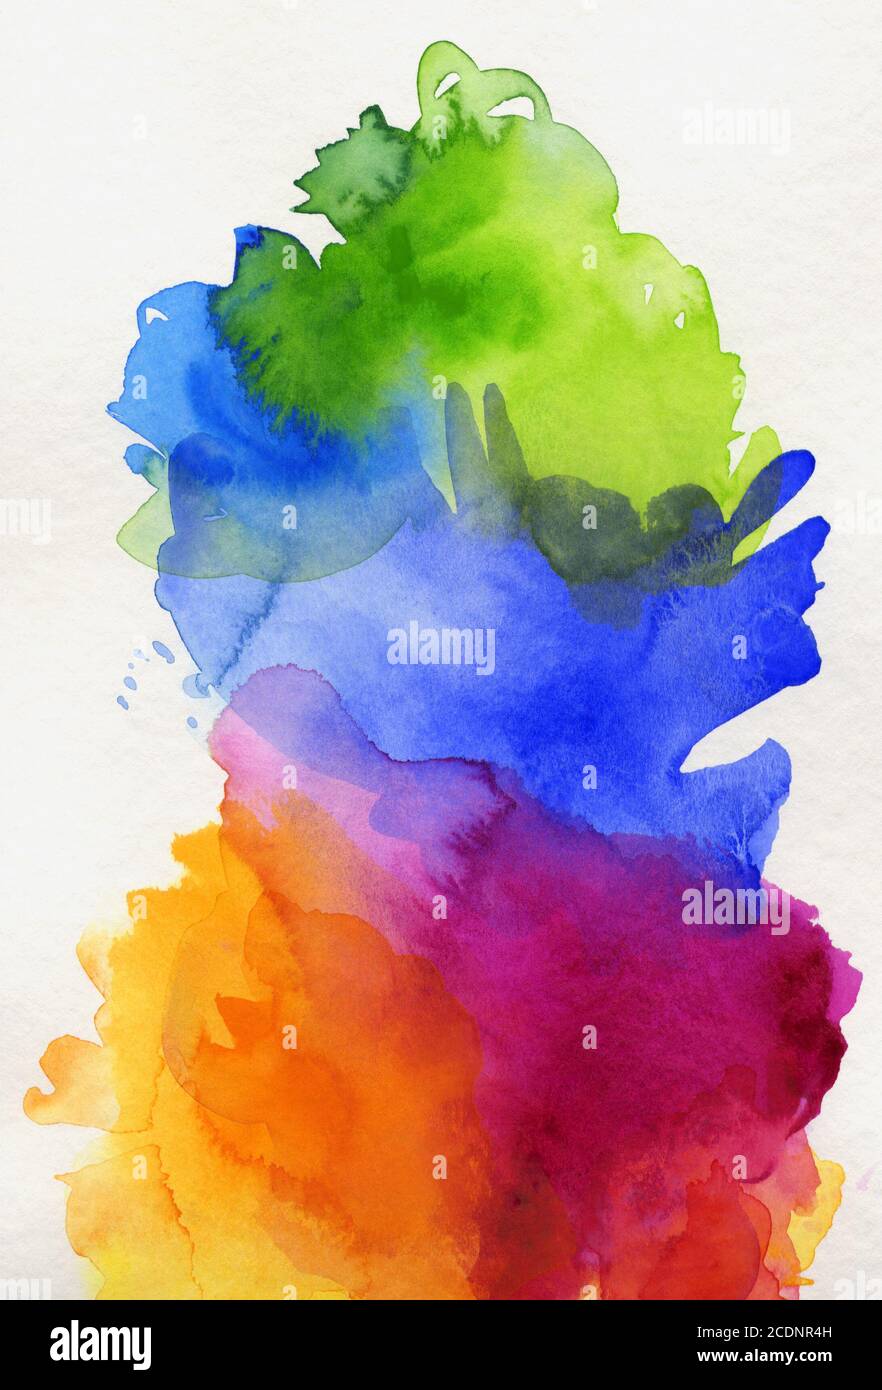 hand painted rainbow watercolor on paper Stock Photo